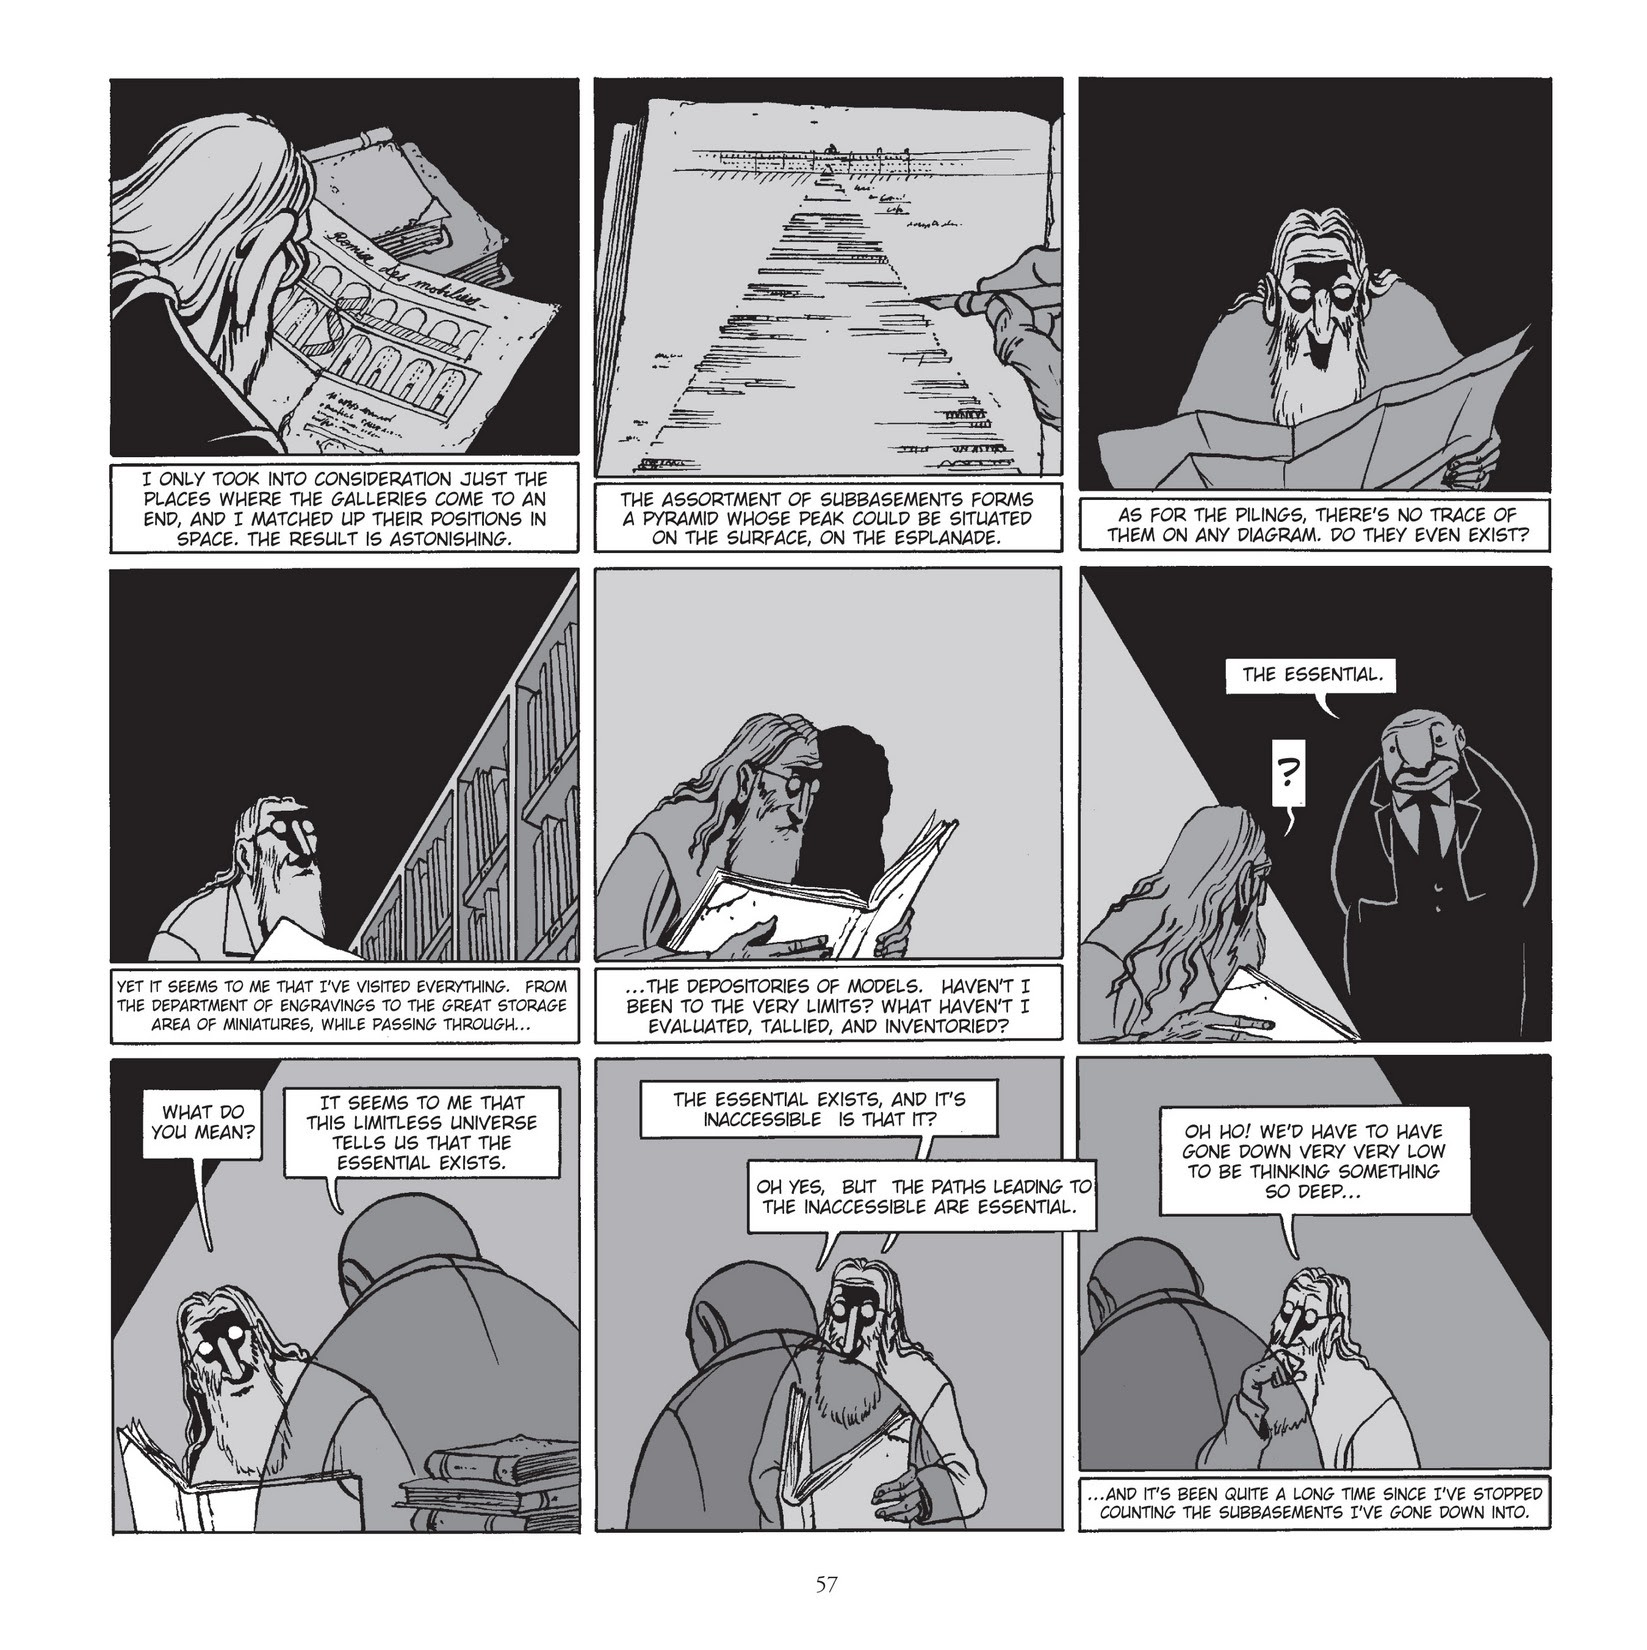 Read online Museum Vaults: Excerpts from the Journal of an Expert comic -  Issue # Full - 57